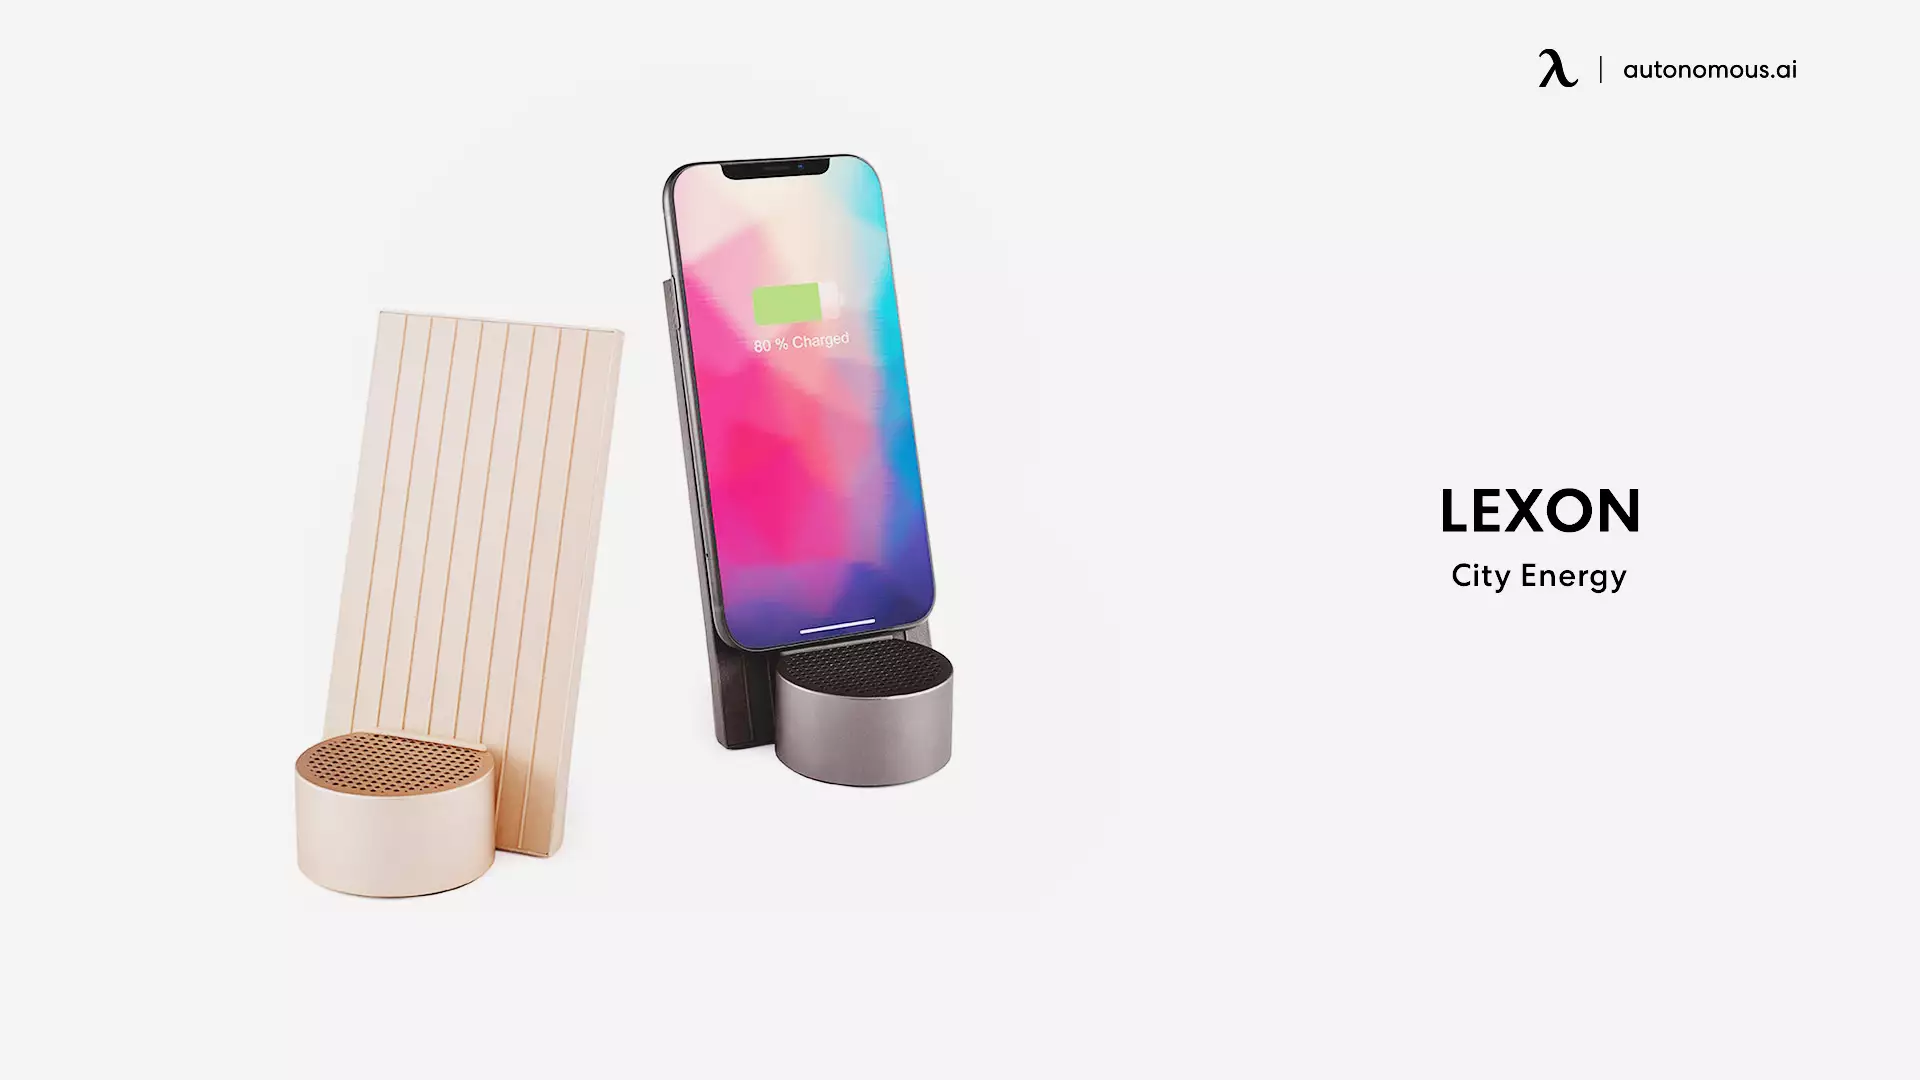 City Energy by Lexon charging stand for your phone